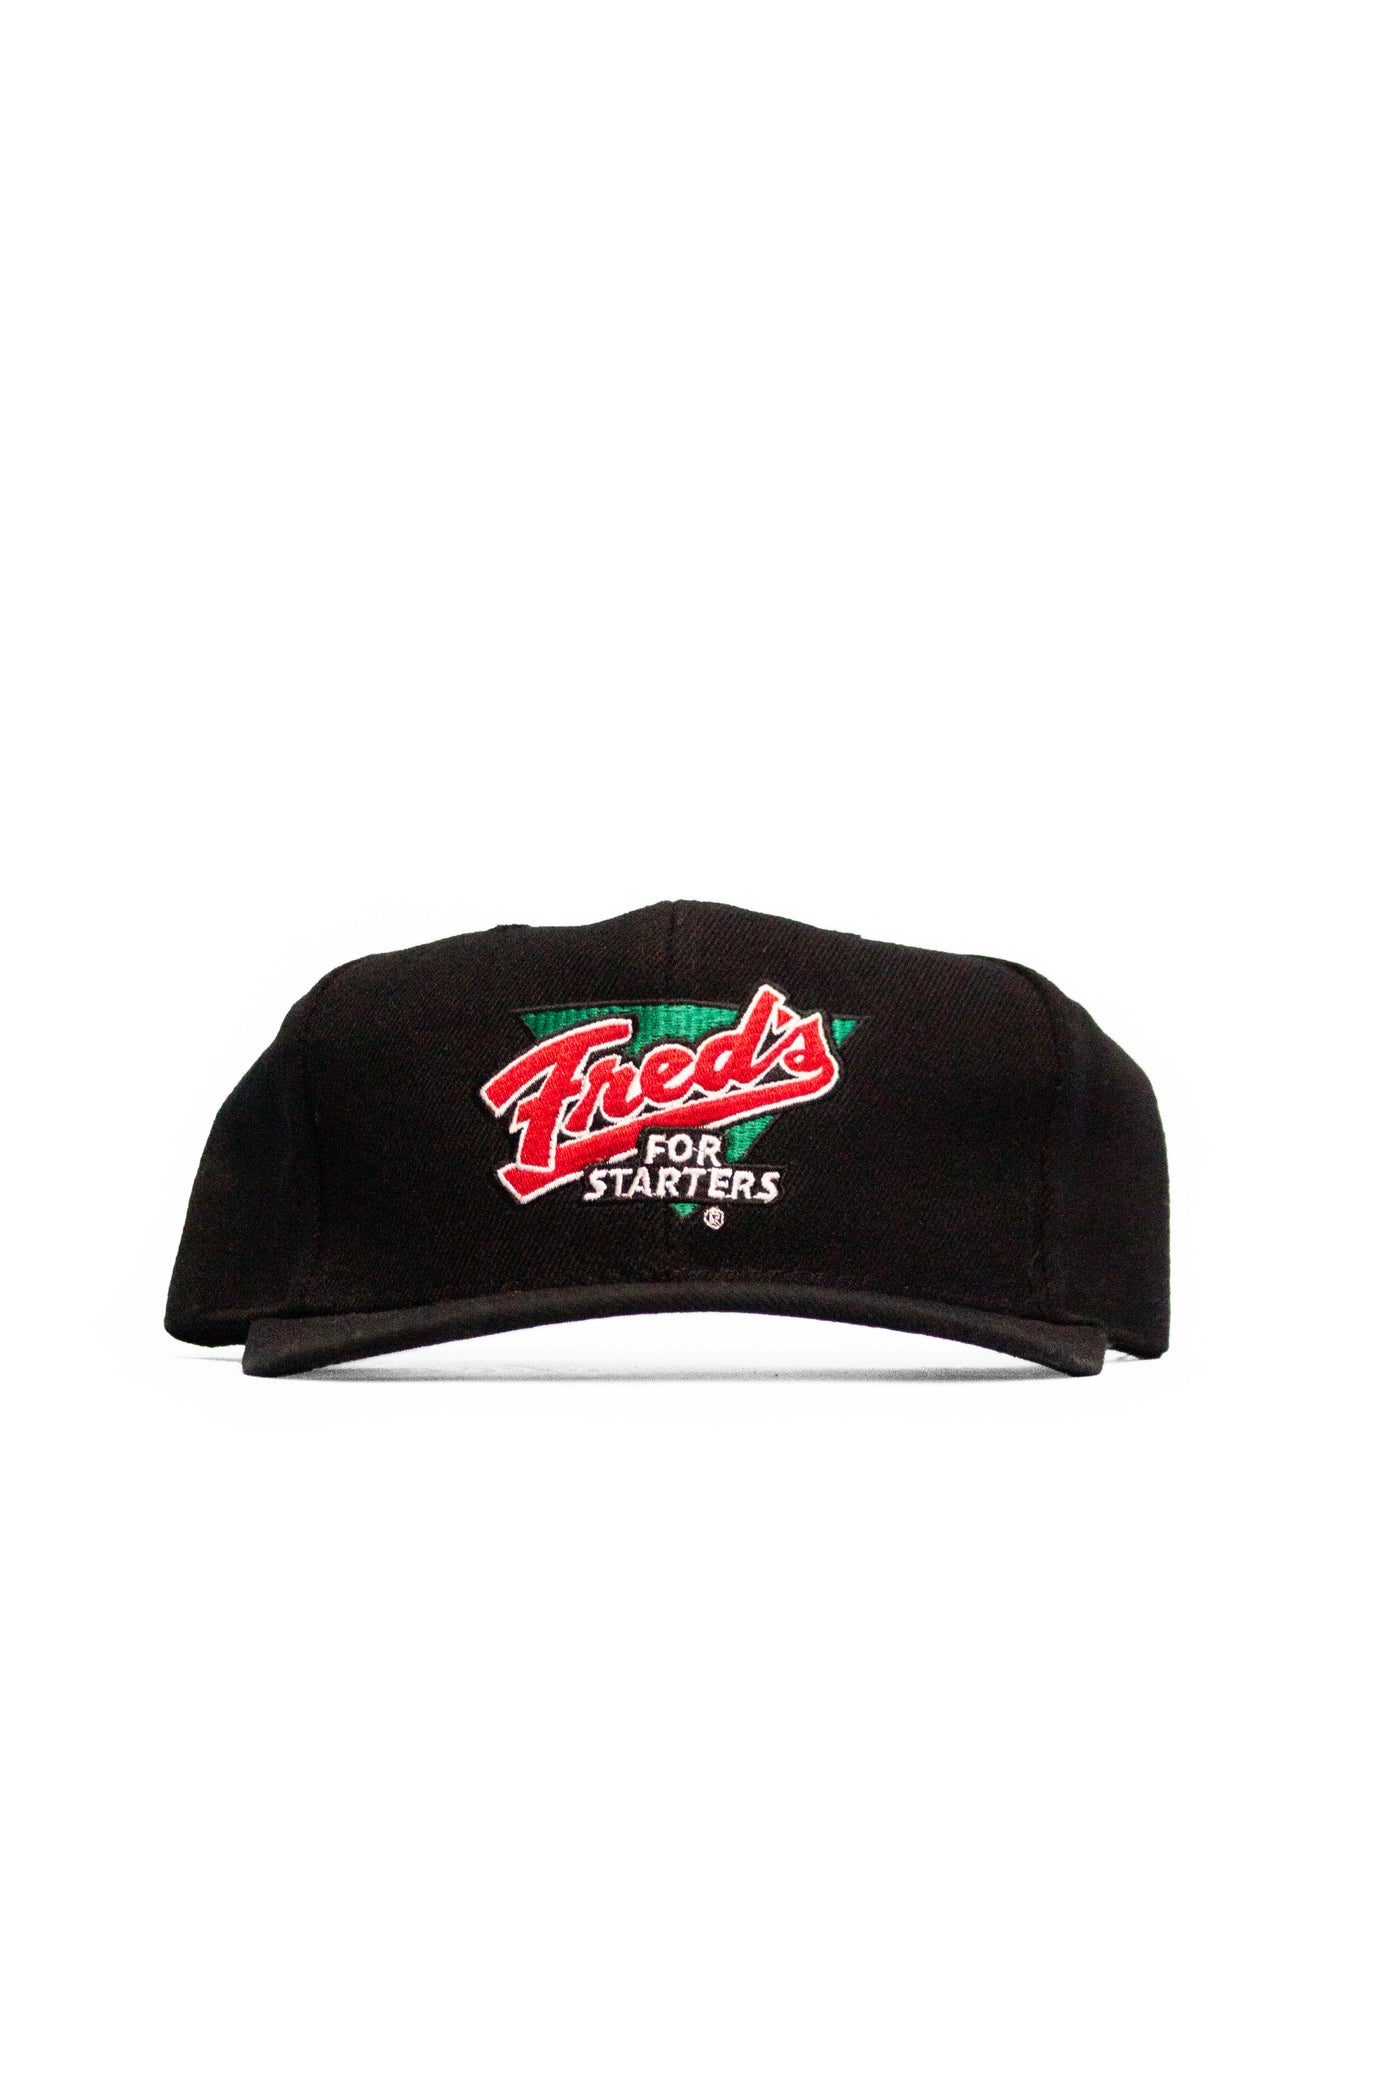 Vintage 90s Fred’s for Starters Cheesestick Snapback